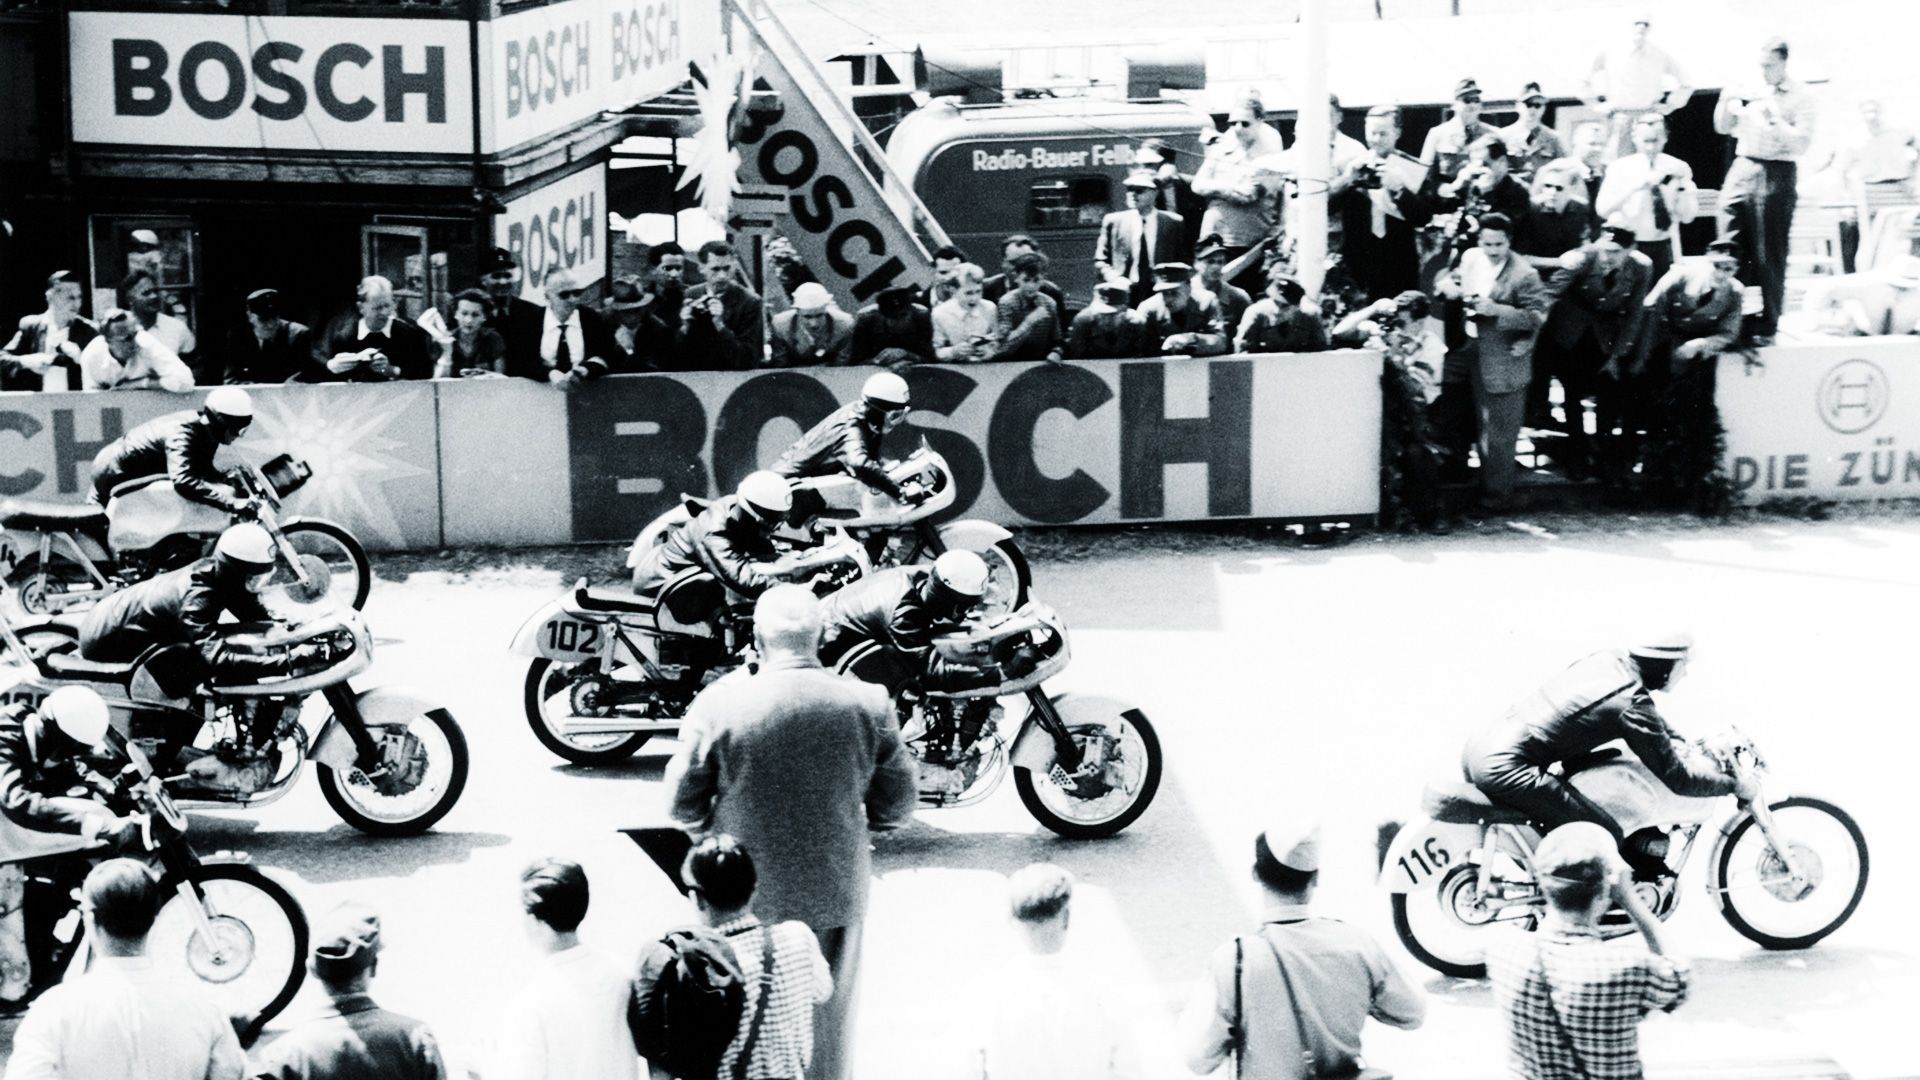 NSU motorcycles on the racetrack